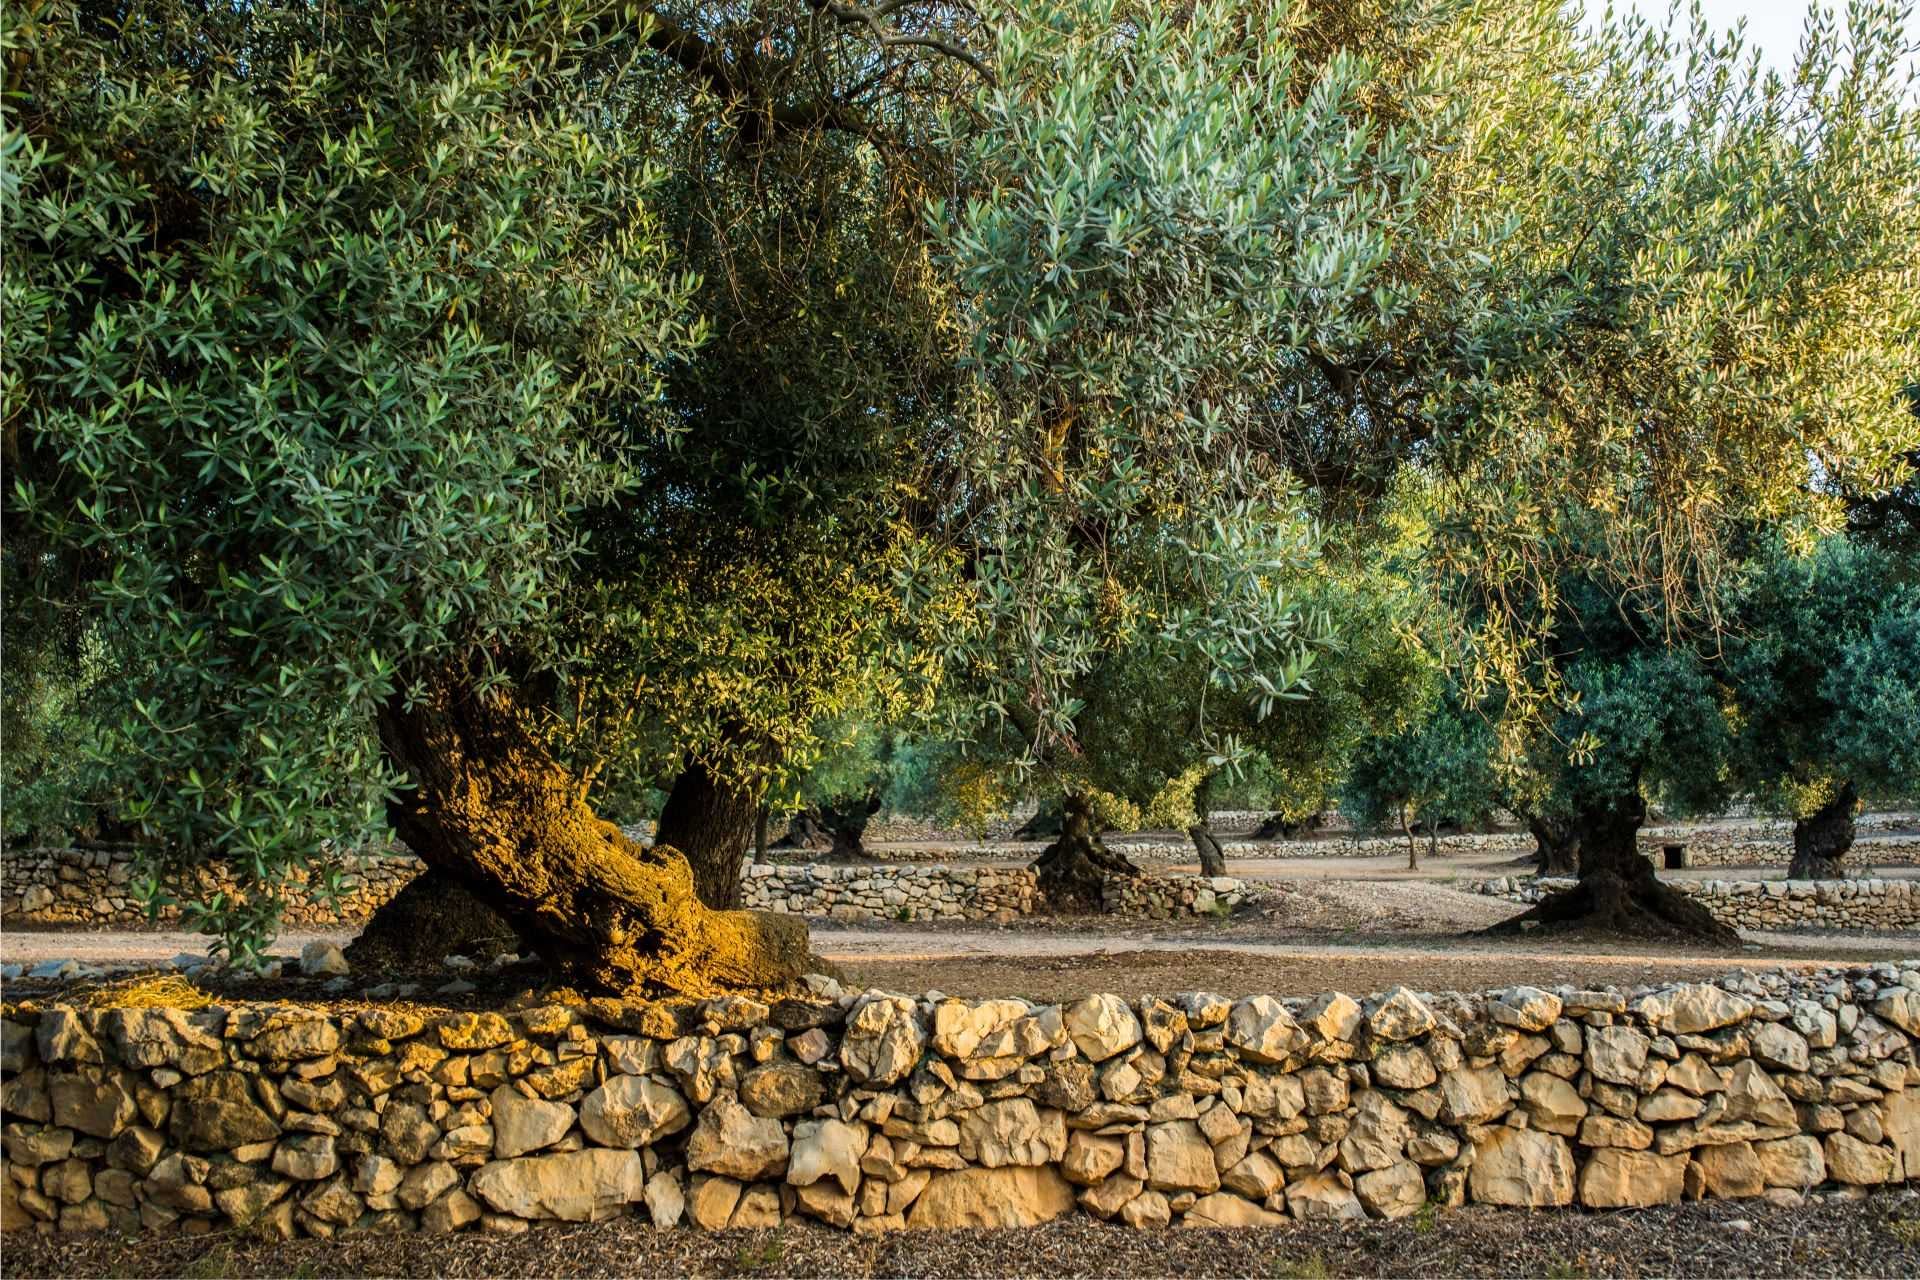 europe-profiles-production-catalan-producers-emphasize-history-and-sustainability-in-tourism-initiative-olive-oil-times